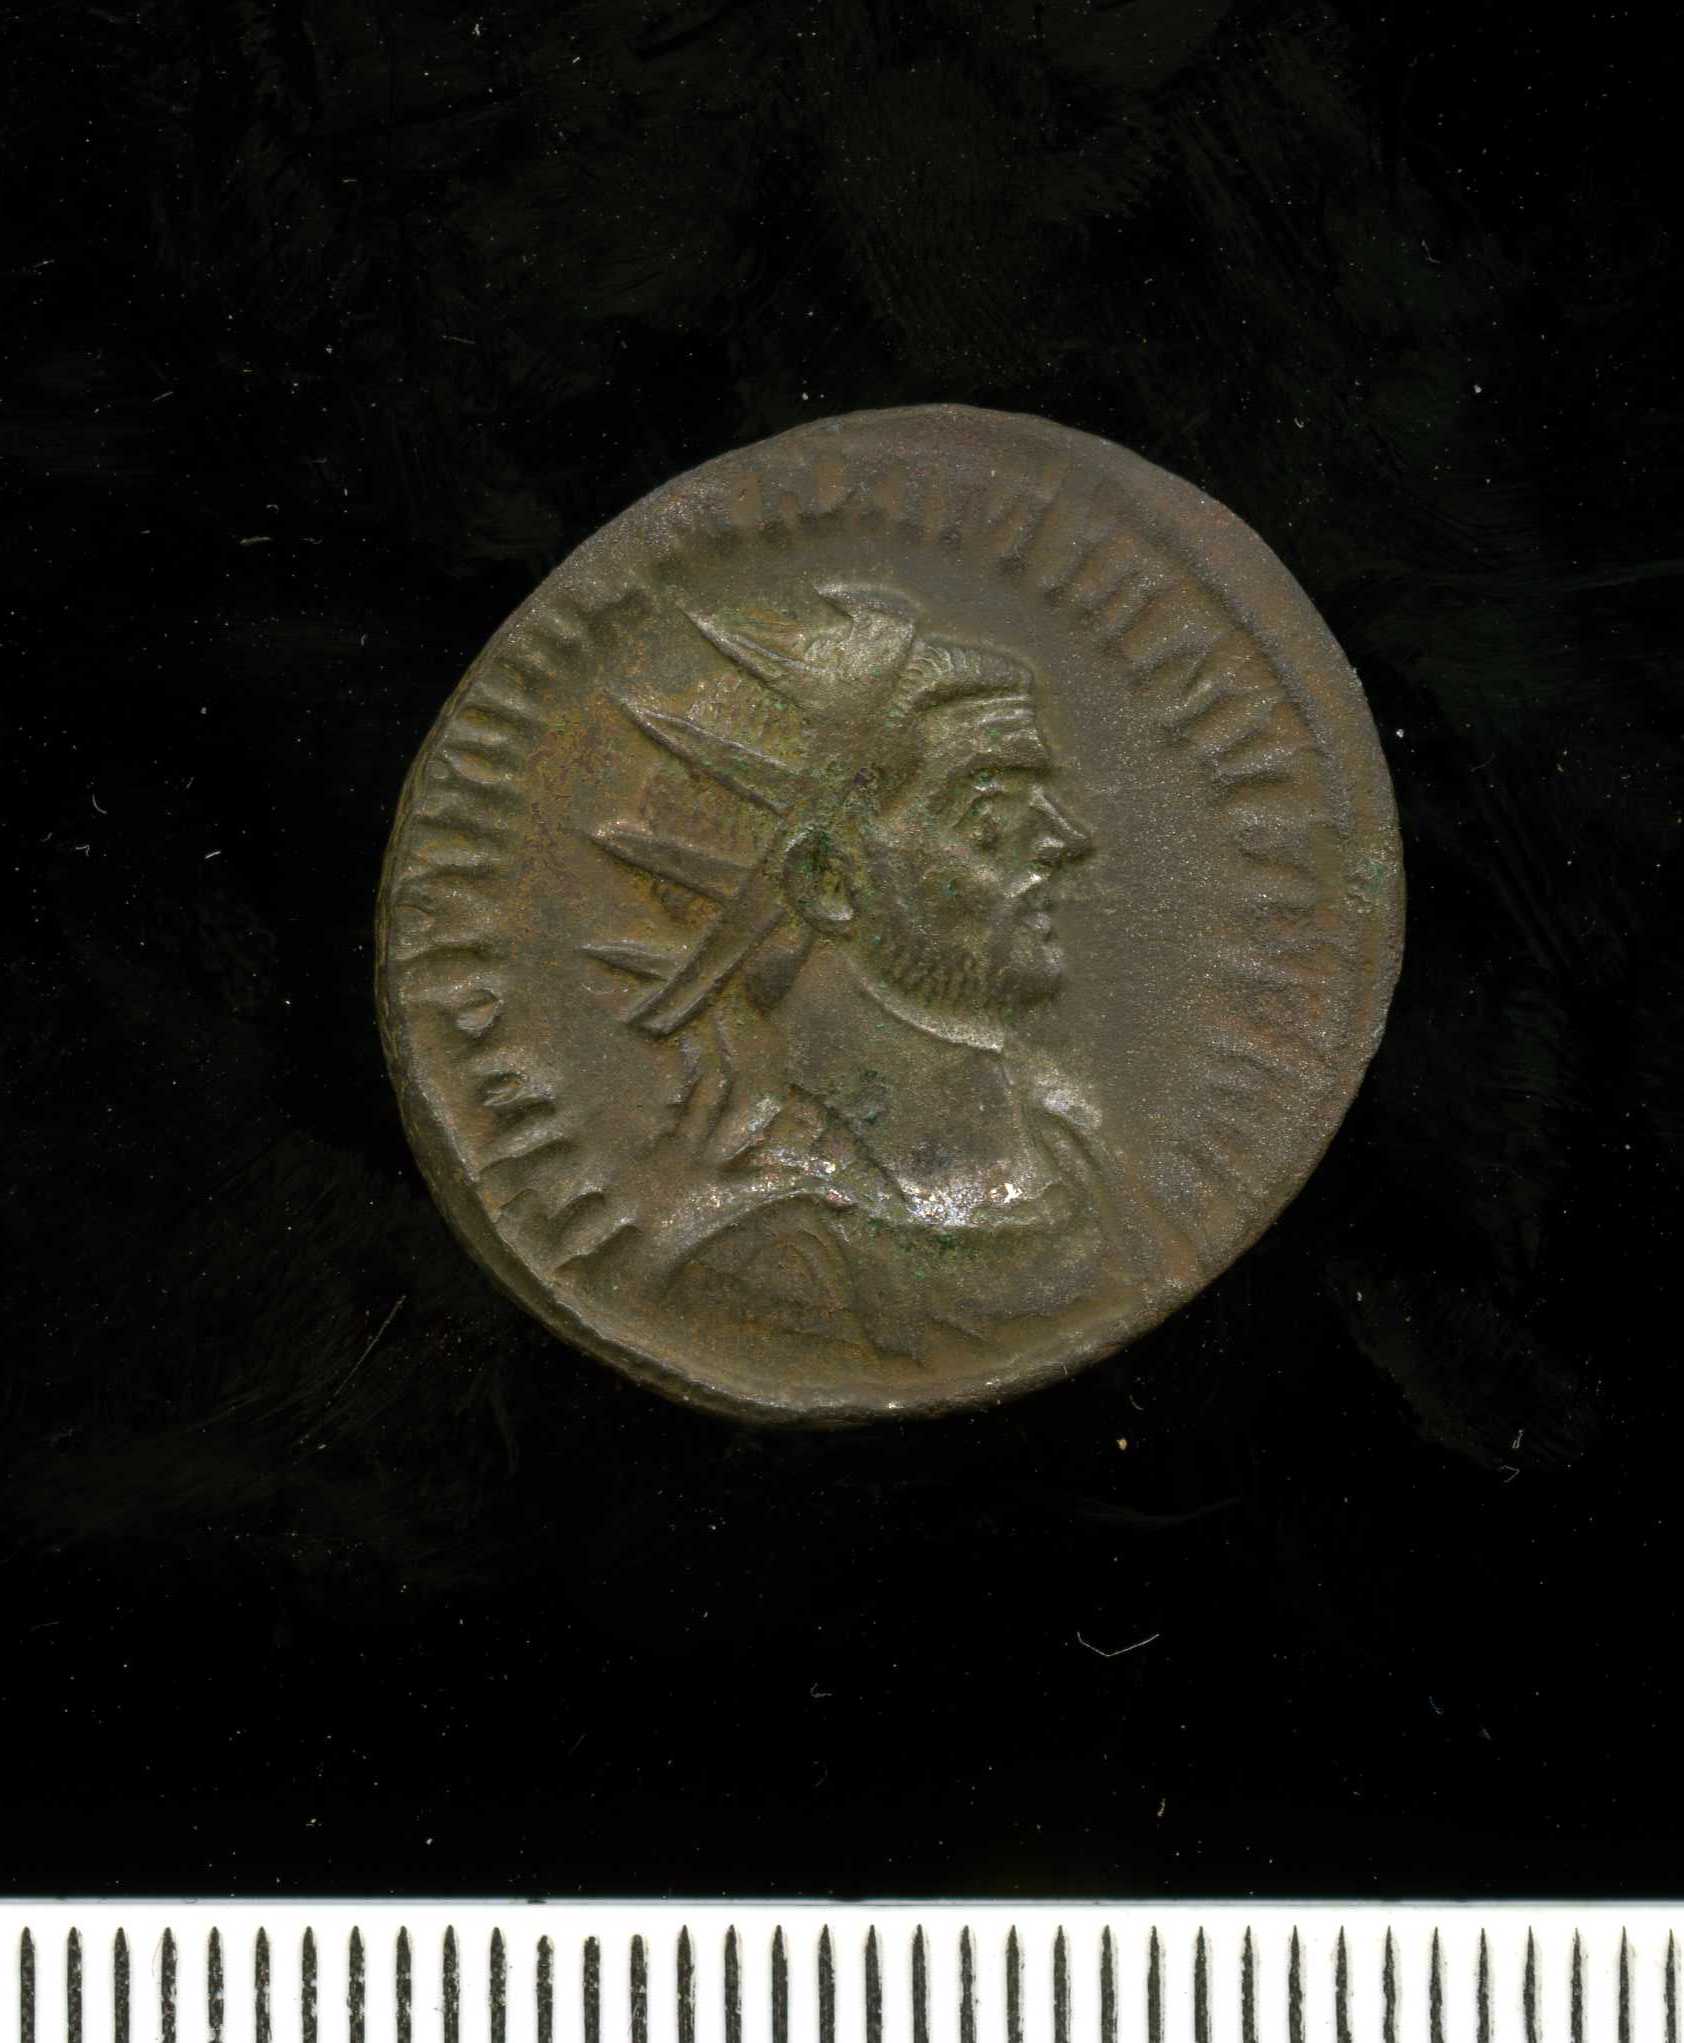 Silver washed radiate of Diocletian 284-305 (11 2) Obverse